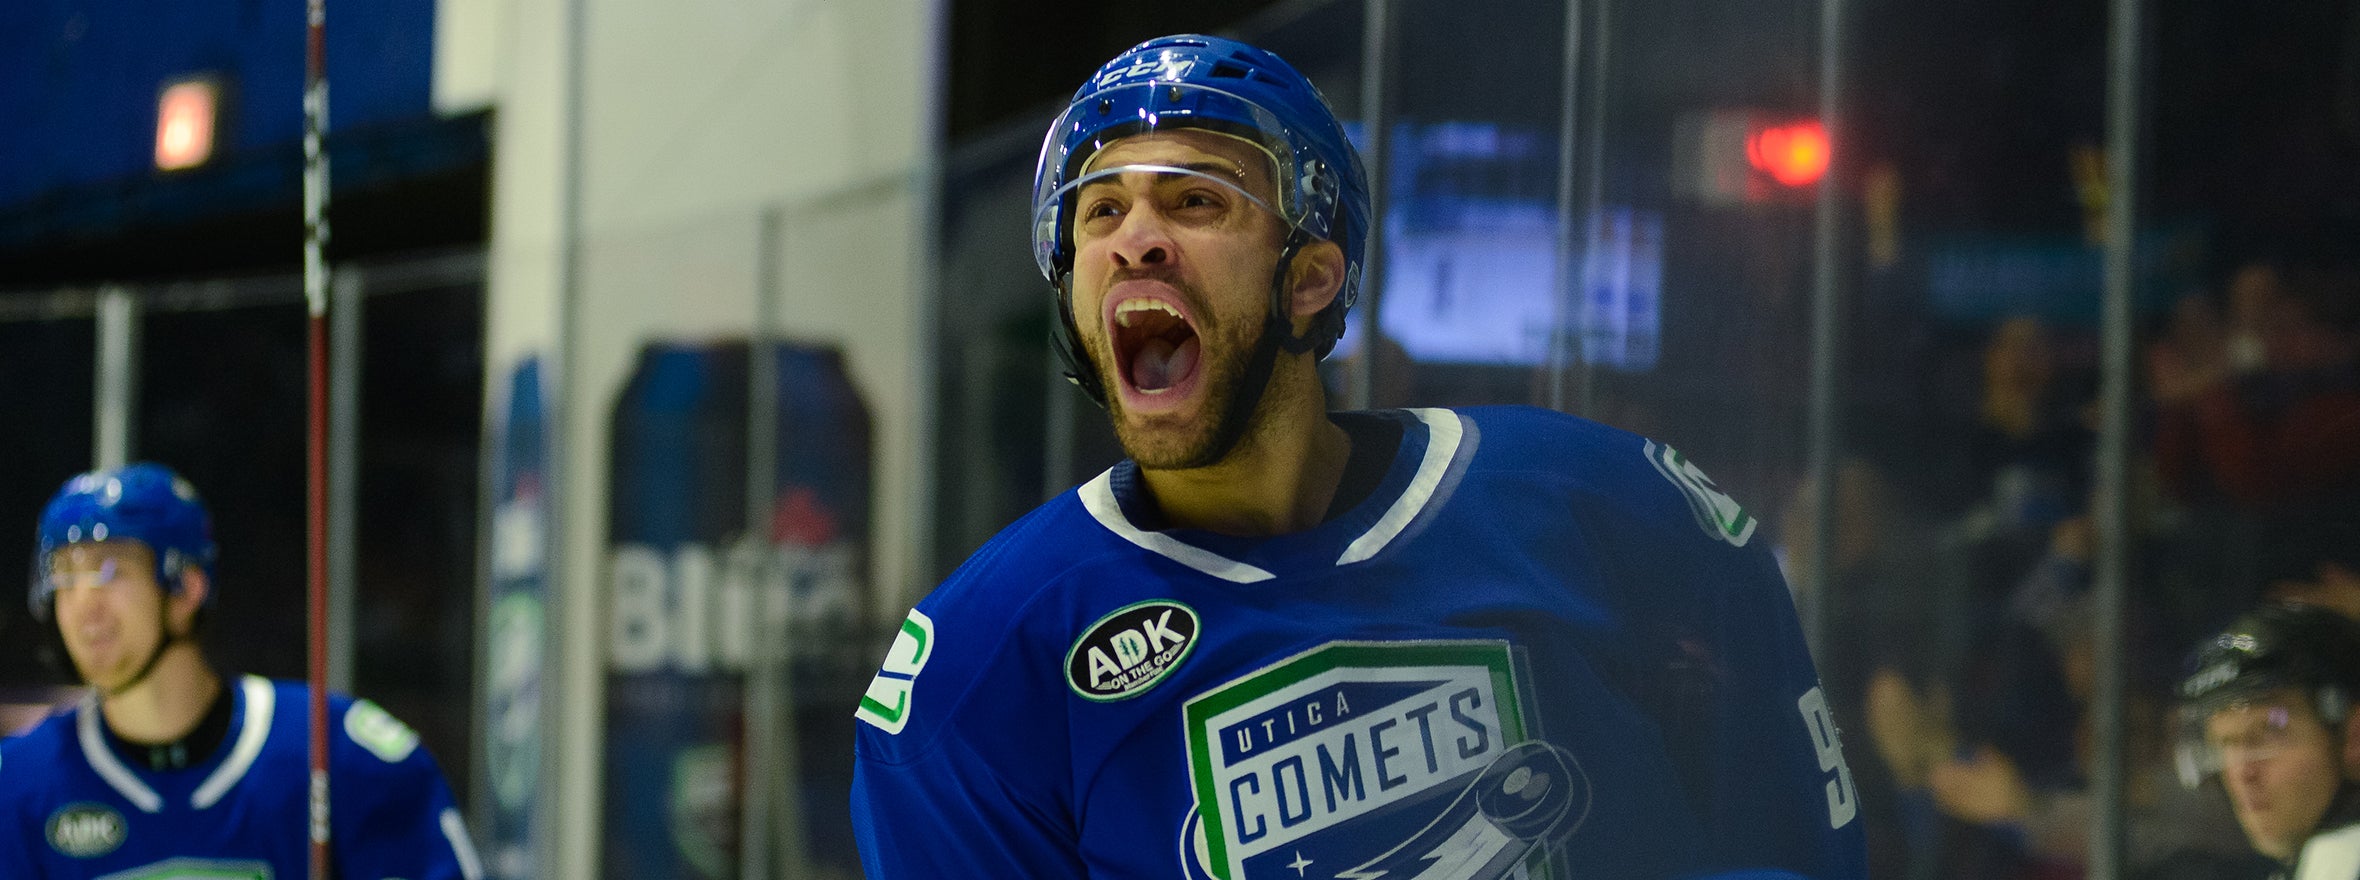 COMETS RING IN NEW YEAR WITH WIN OVER ROCHESTER